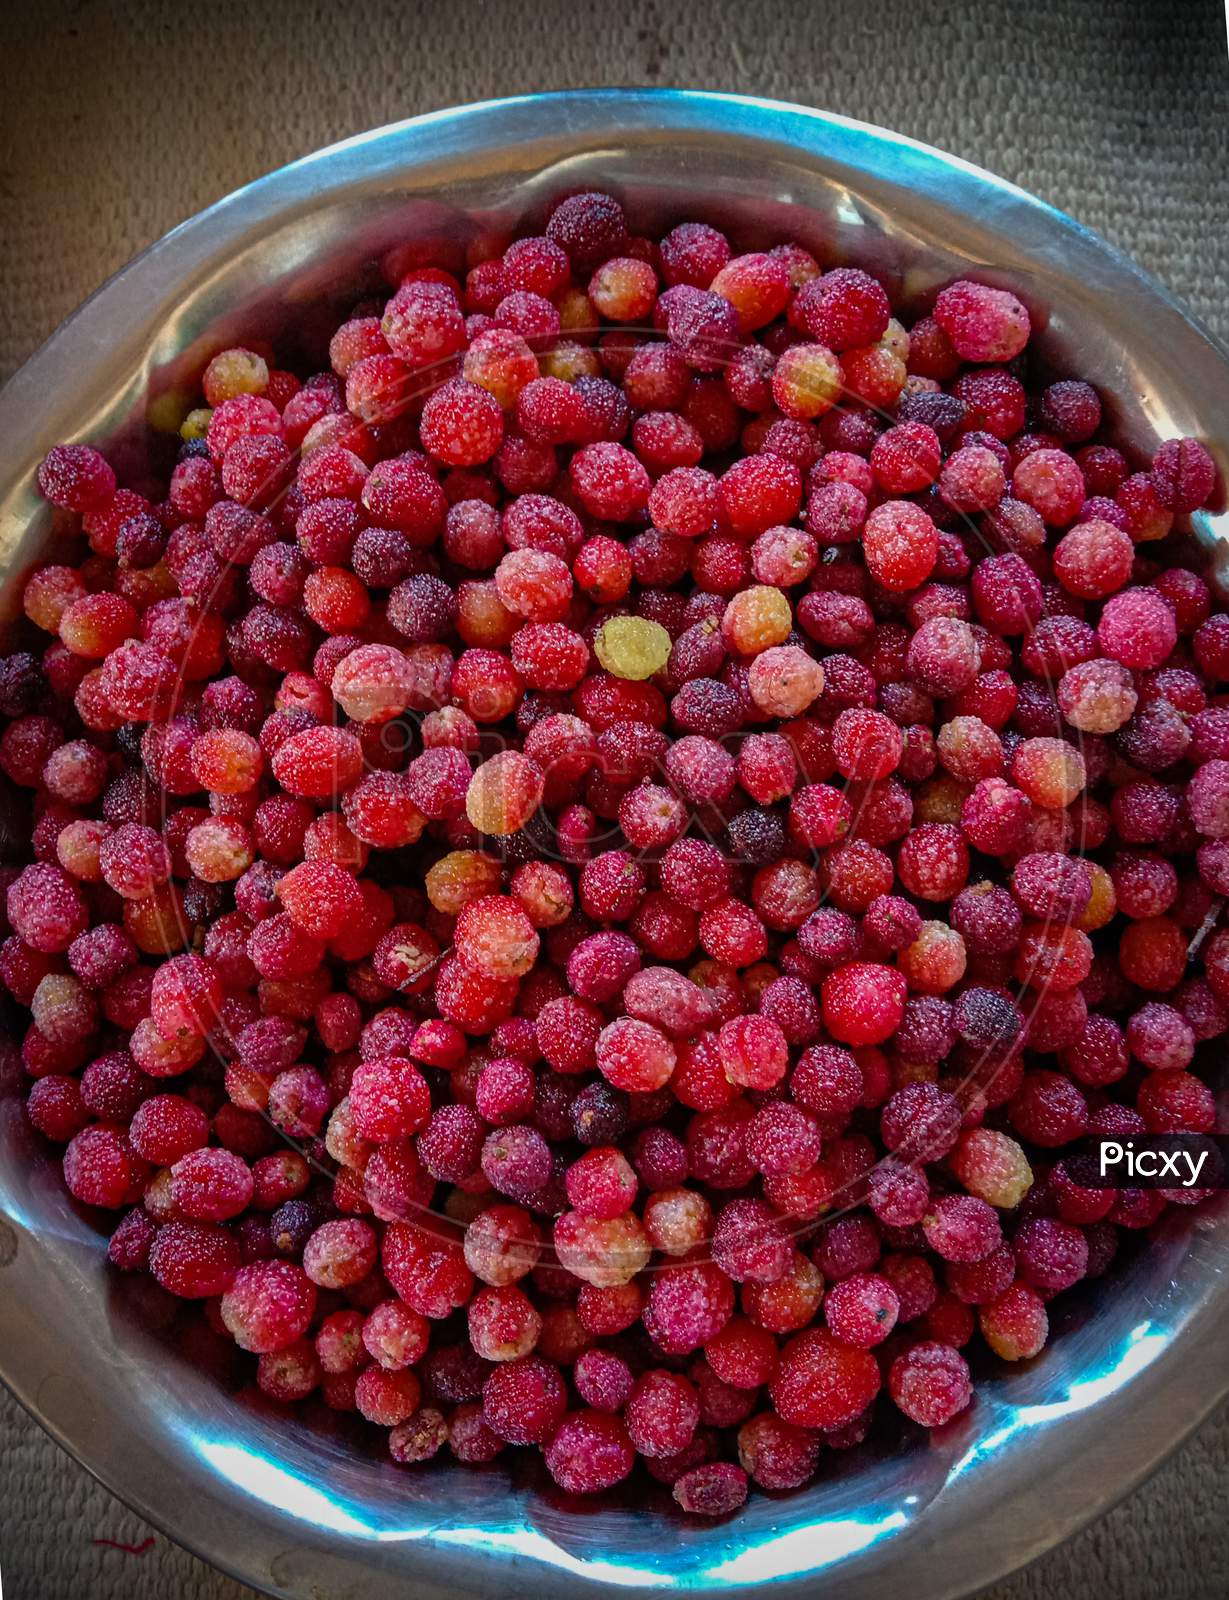 kafal, famous local tree berries in himachal and utrakhand.